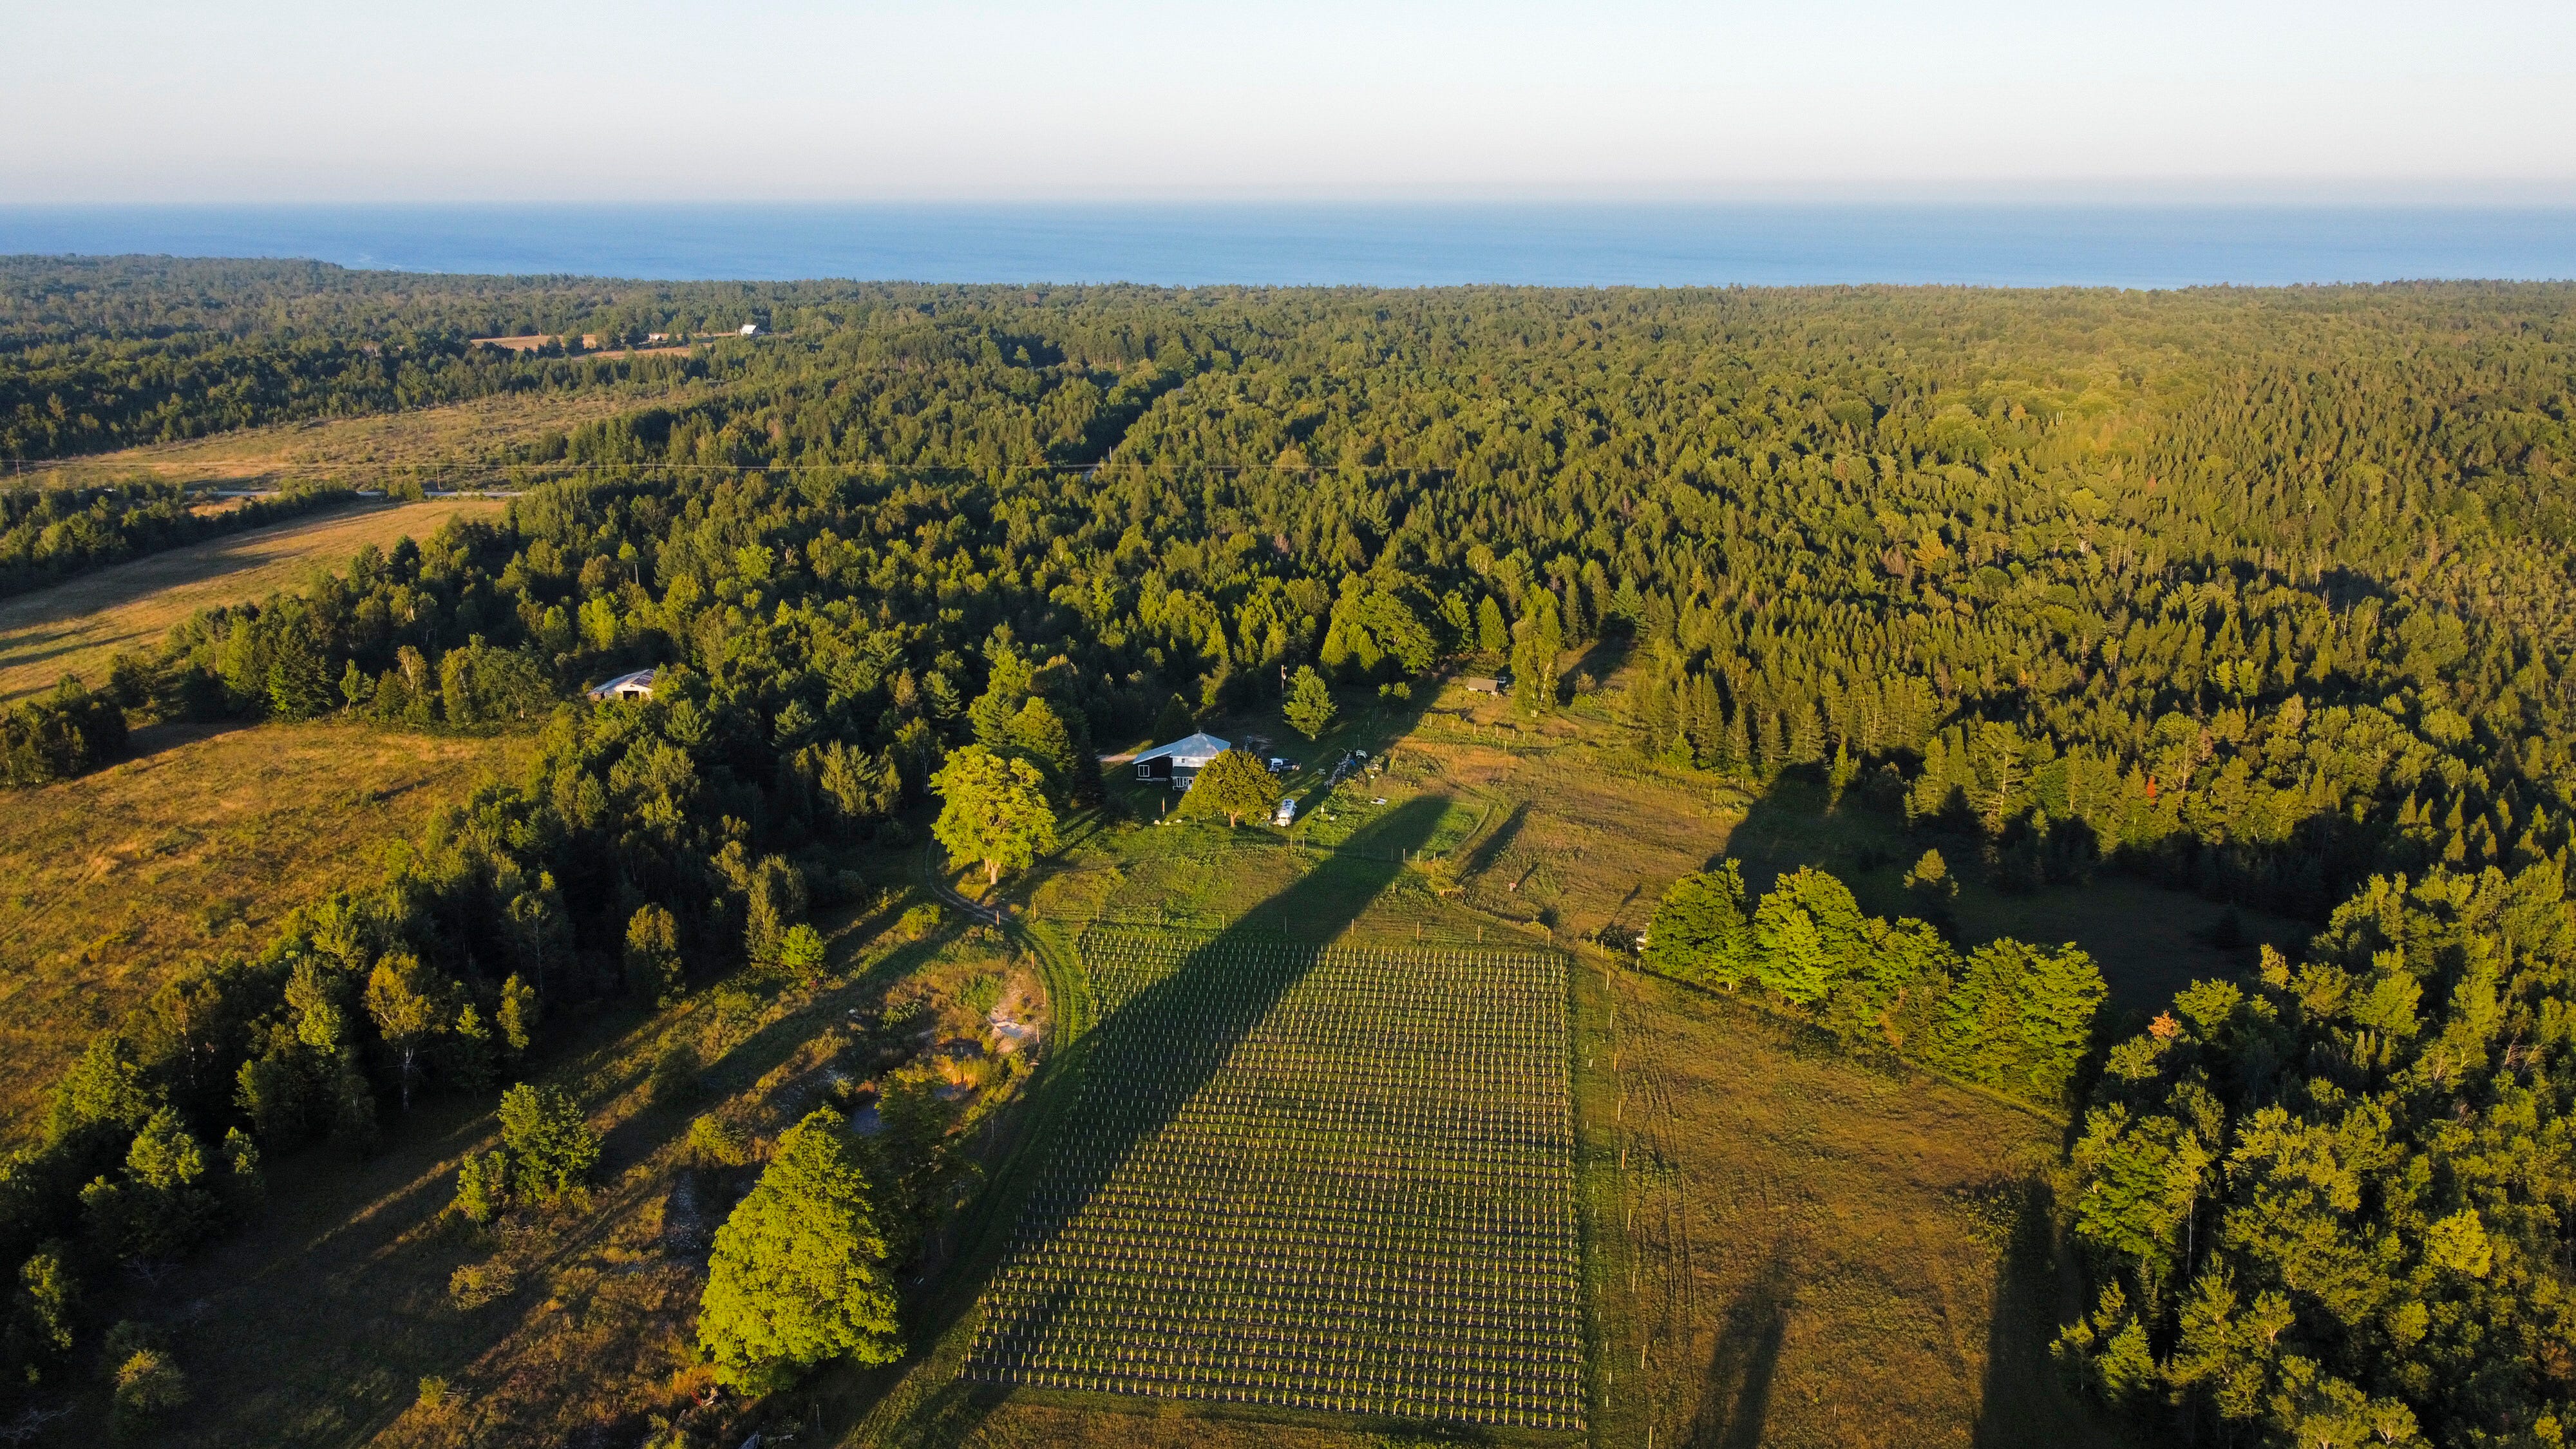 Overlooking 2,100 vines in the first field of Antho Vineyards from the air, looking towards Lake Michigan above Beaver Island.